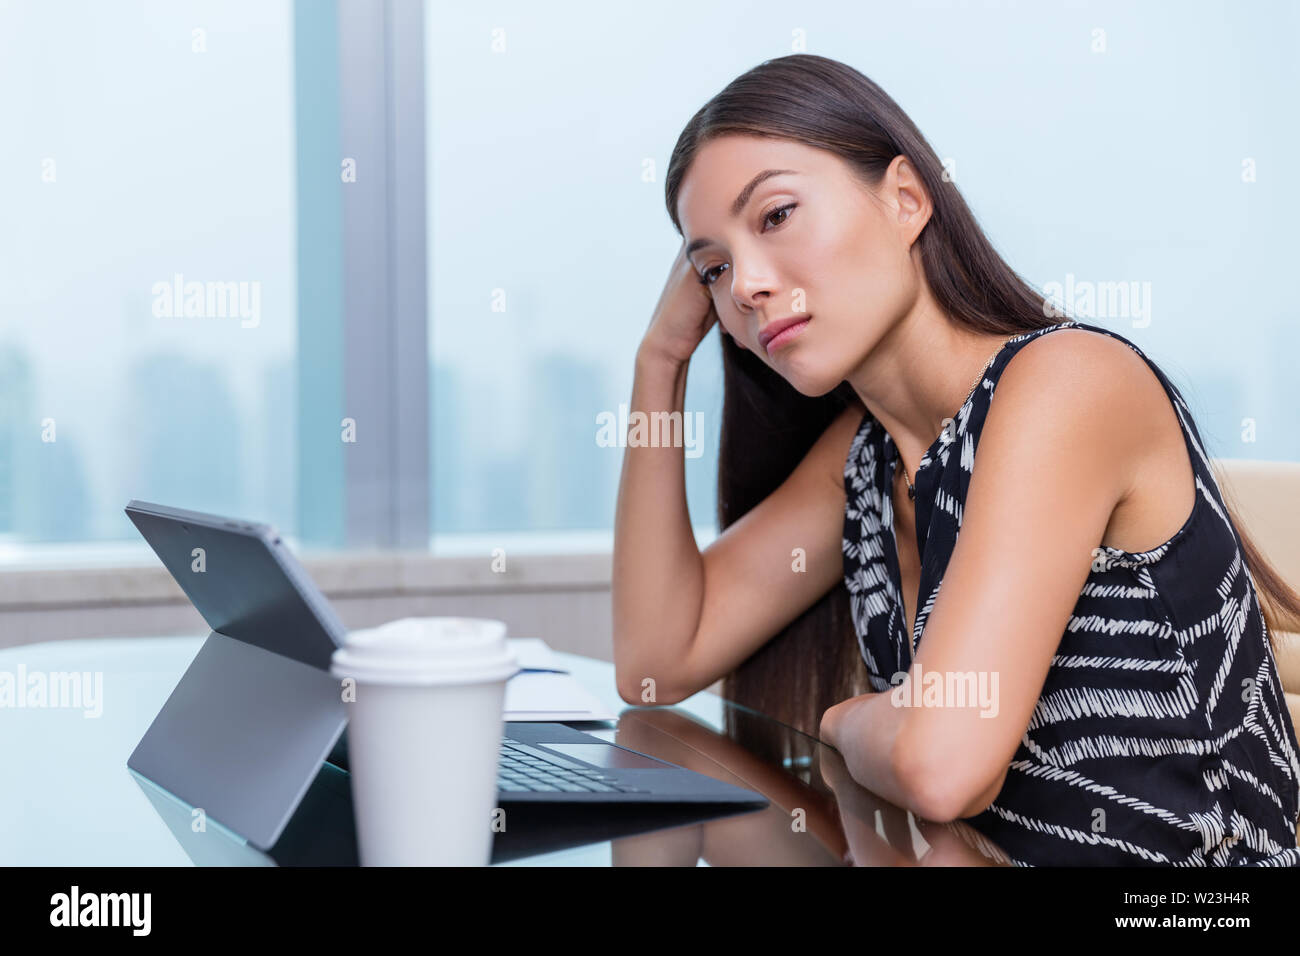 Bored Or Sad Woman Working At Office Job Negative Work Concept